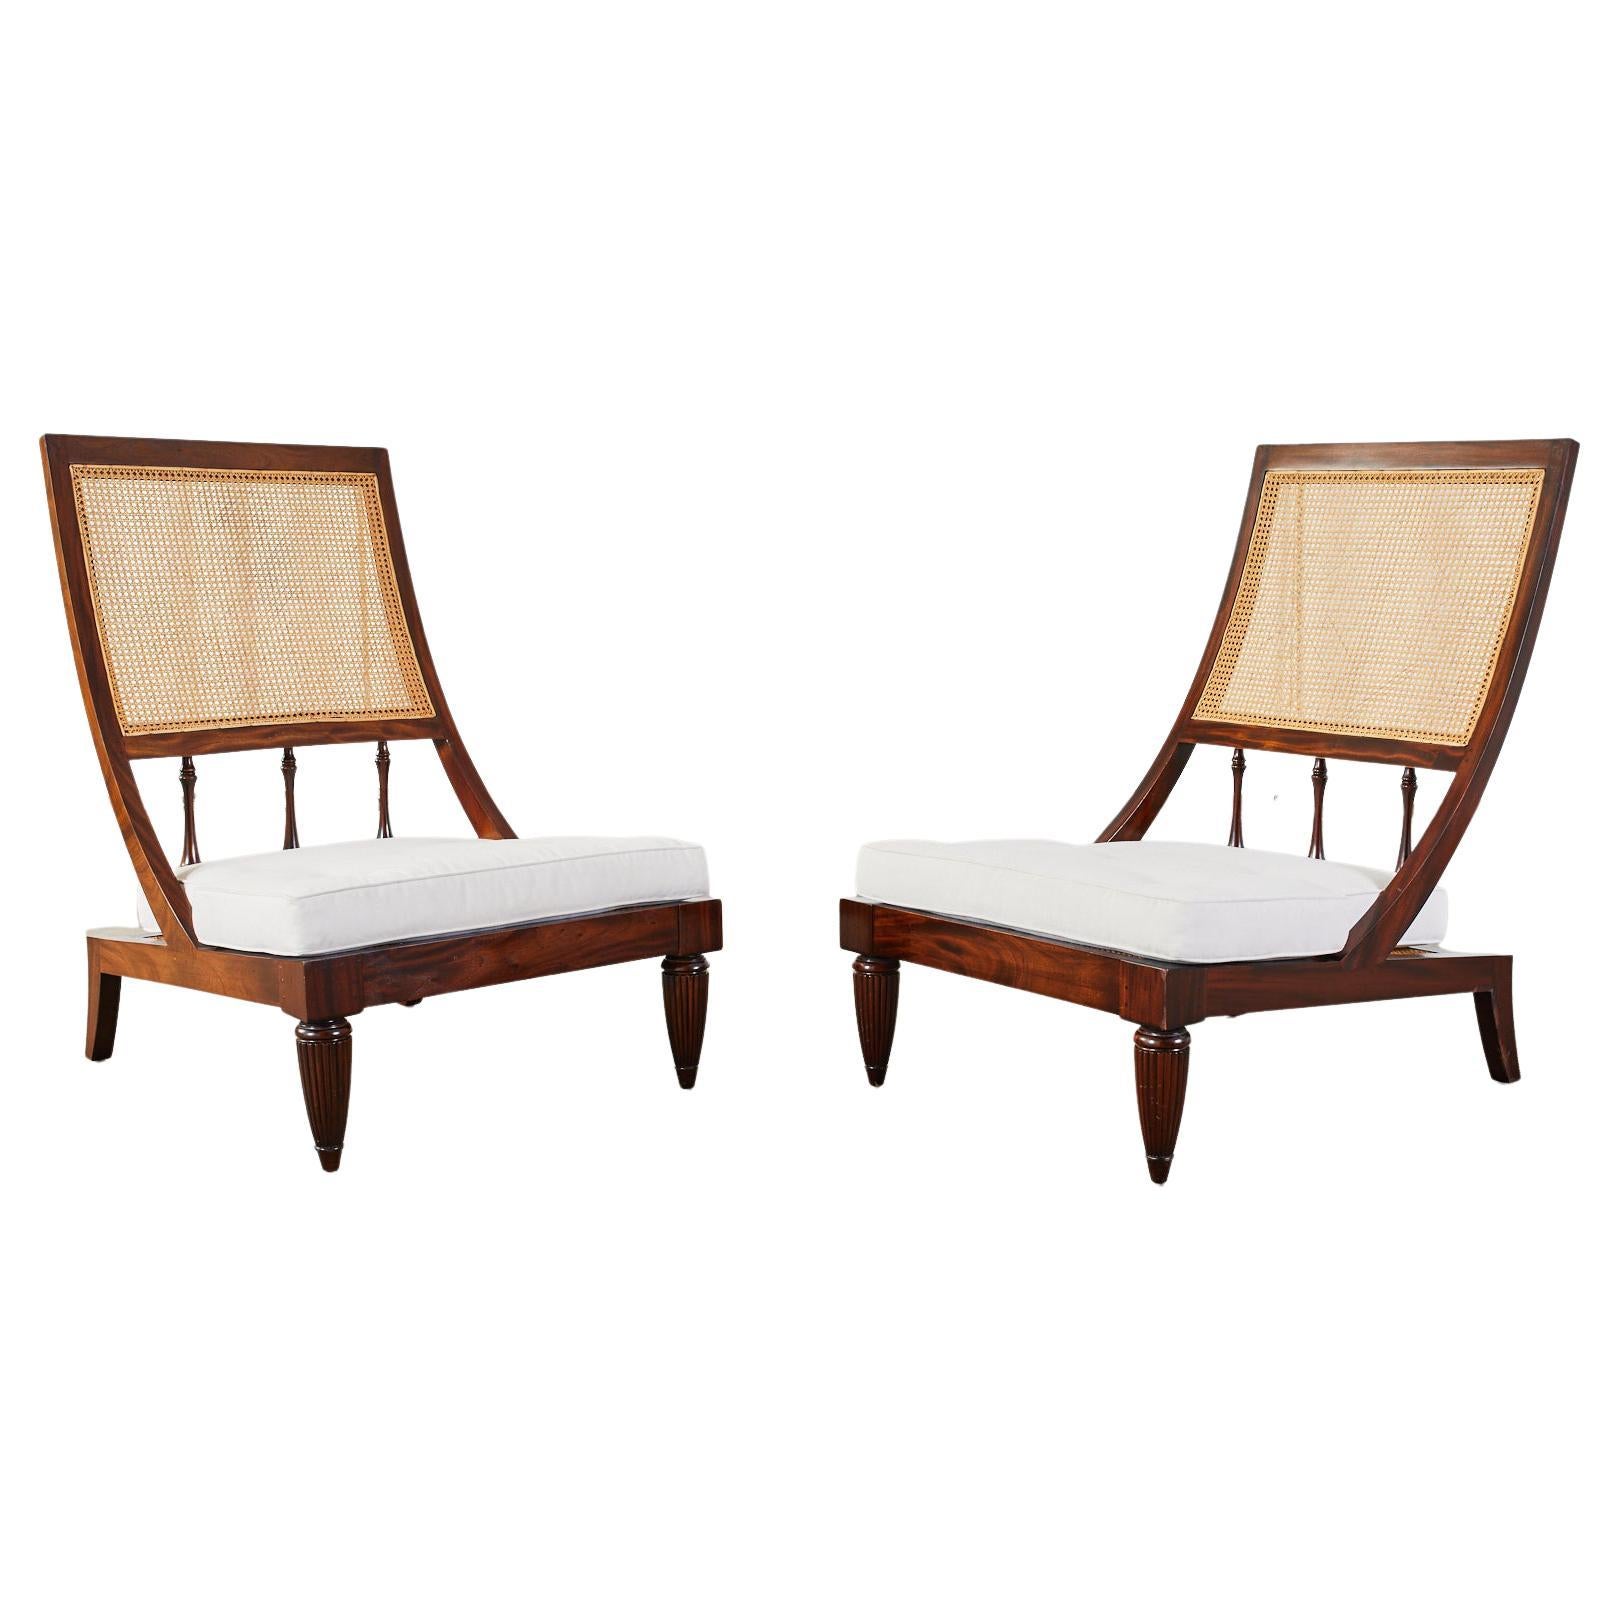 Pair of British Colonial Style Teak Cane Plantation Chairs